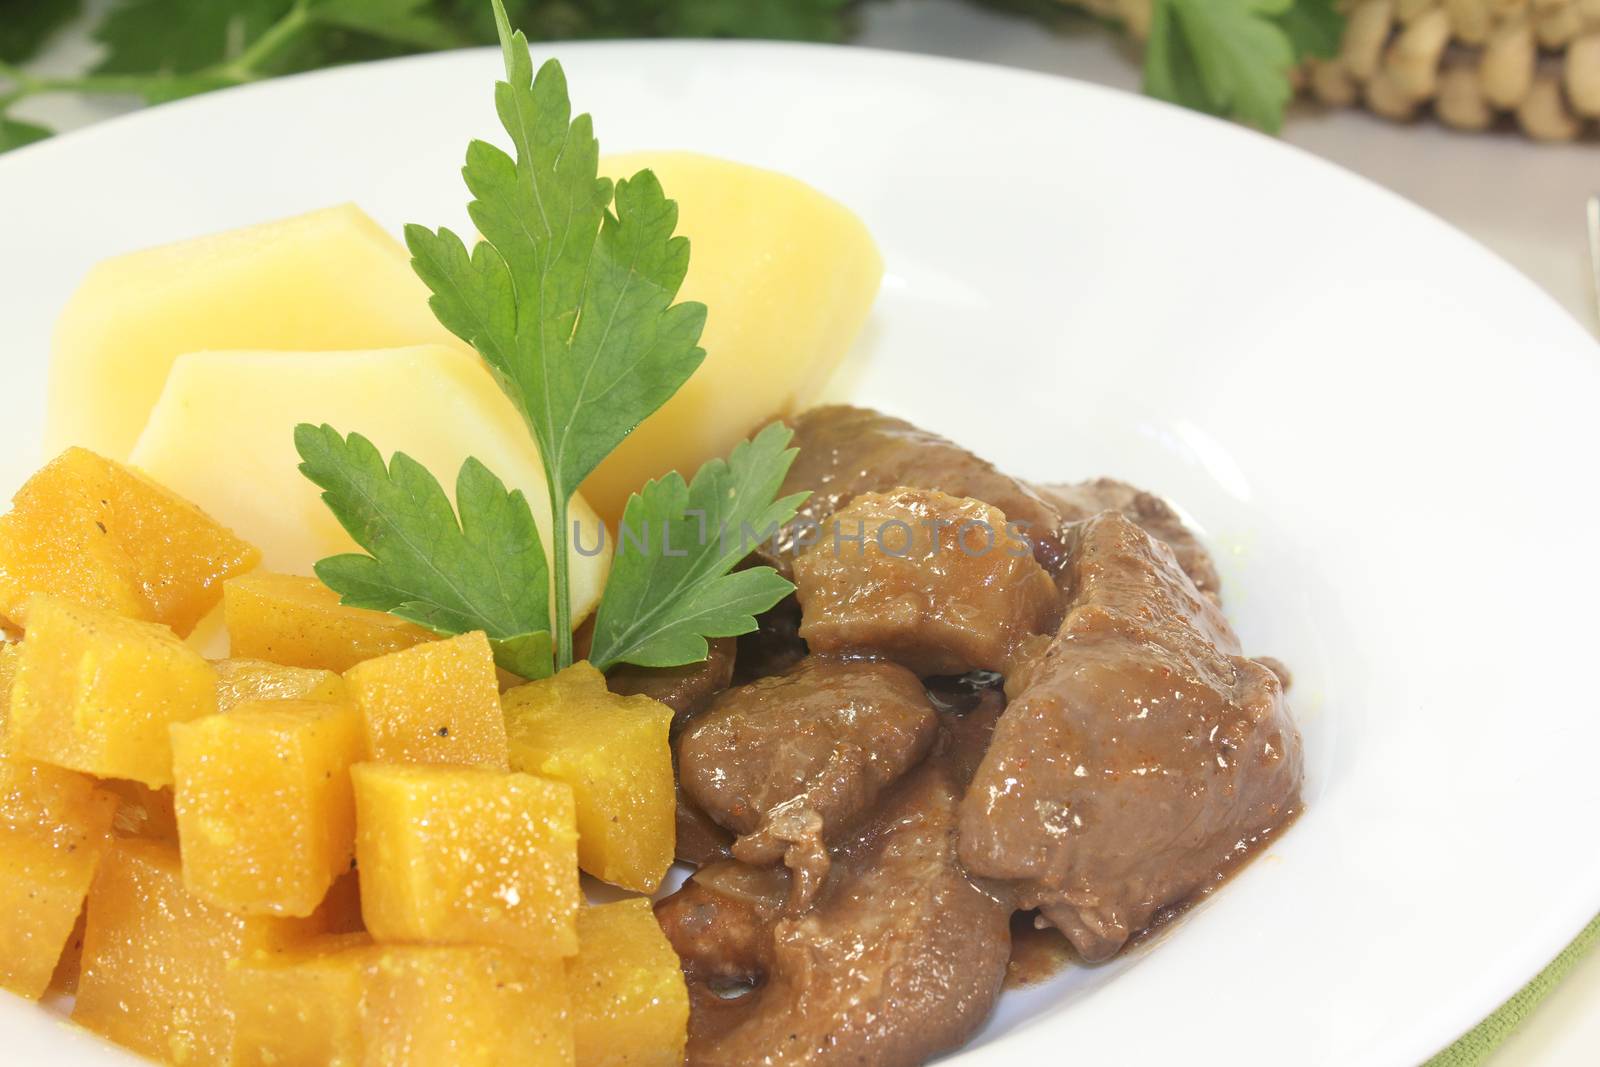 Venison goulash with rutabaga by discovery